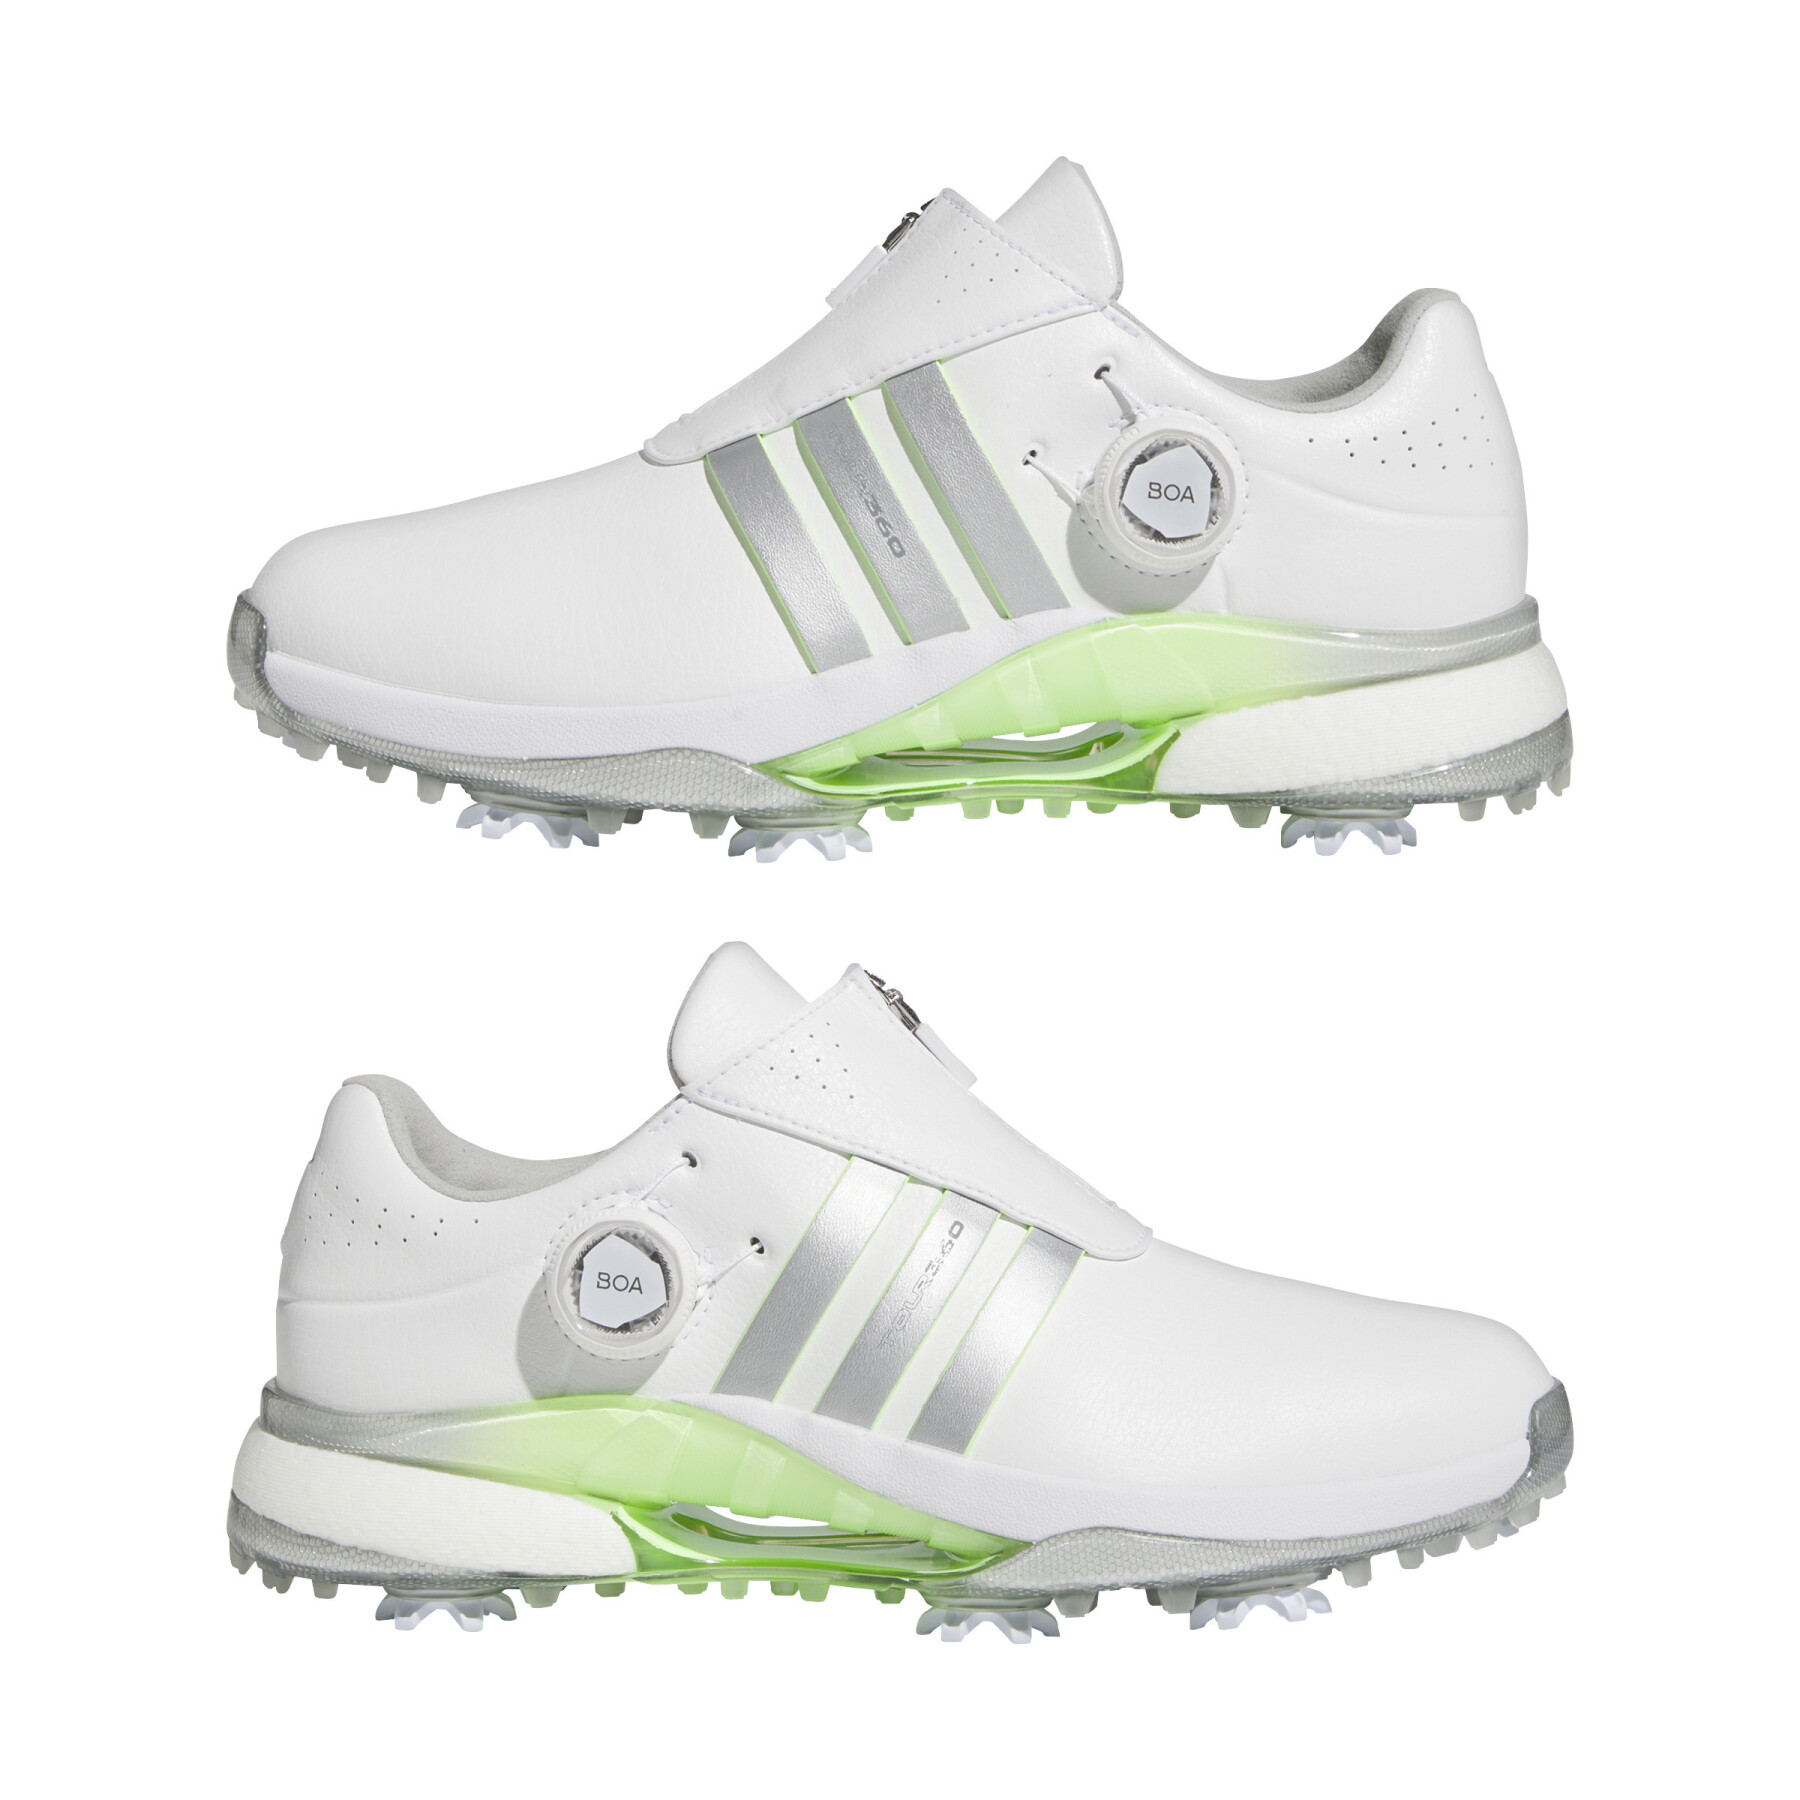 Women's spiked golf shoes adidas Tour360 24 BOA Boos